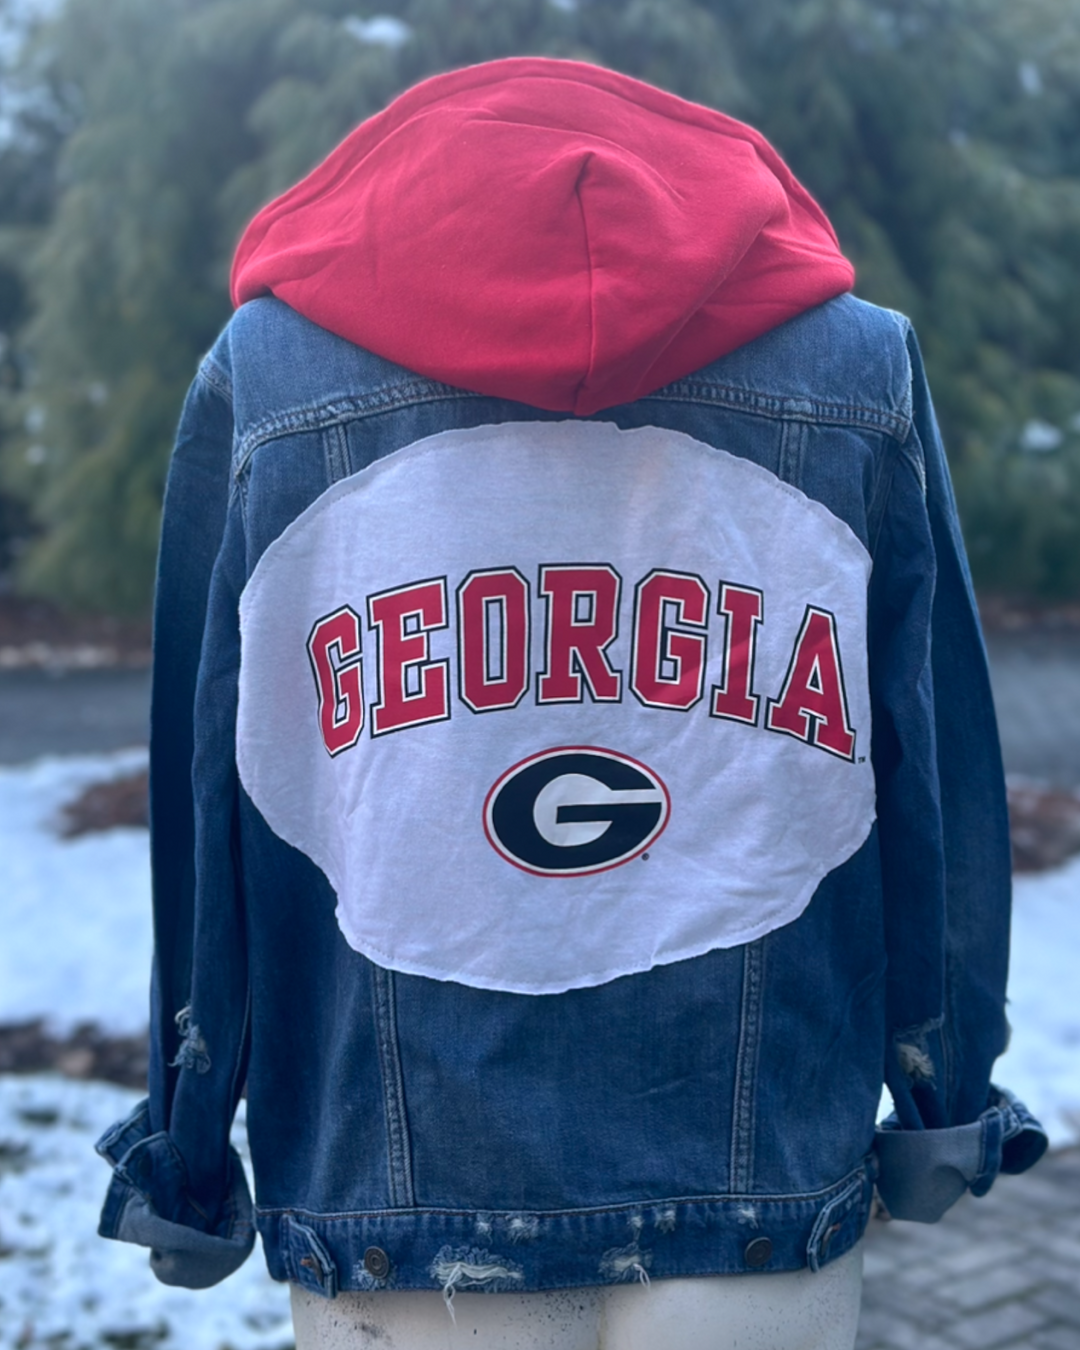 Georgia Reworked Patched Jean Jacket